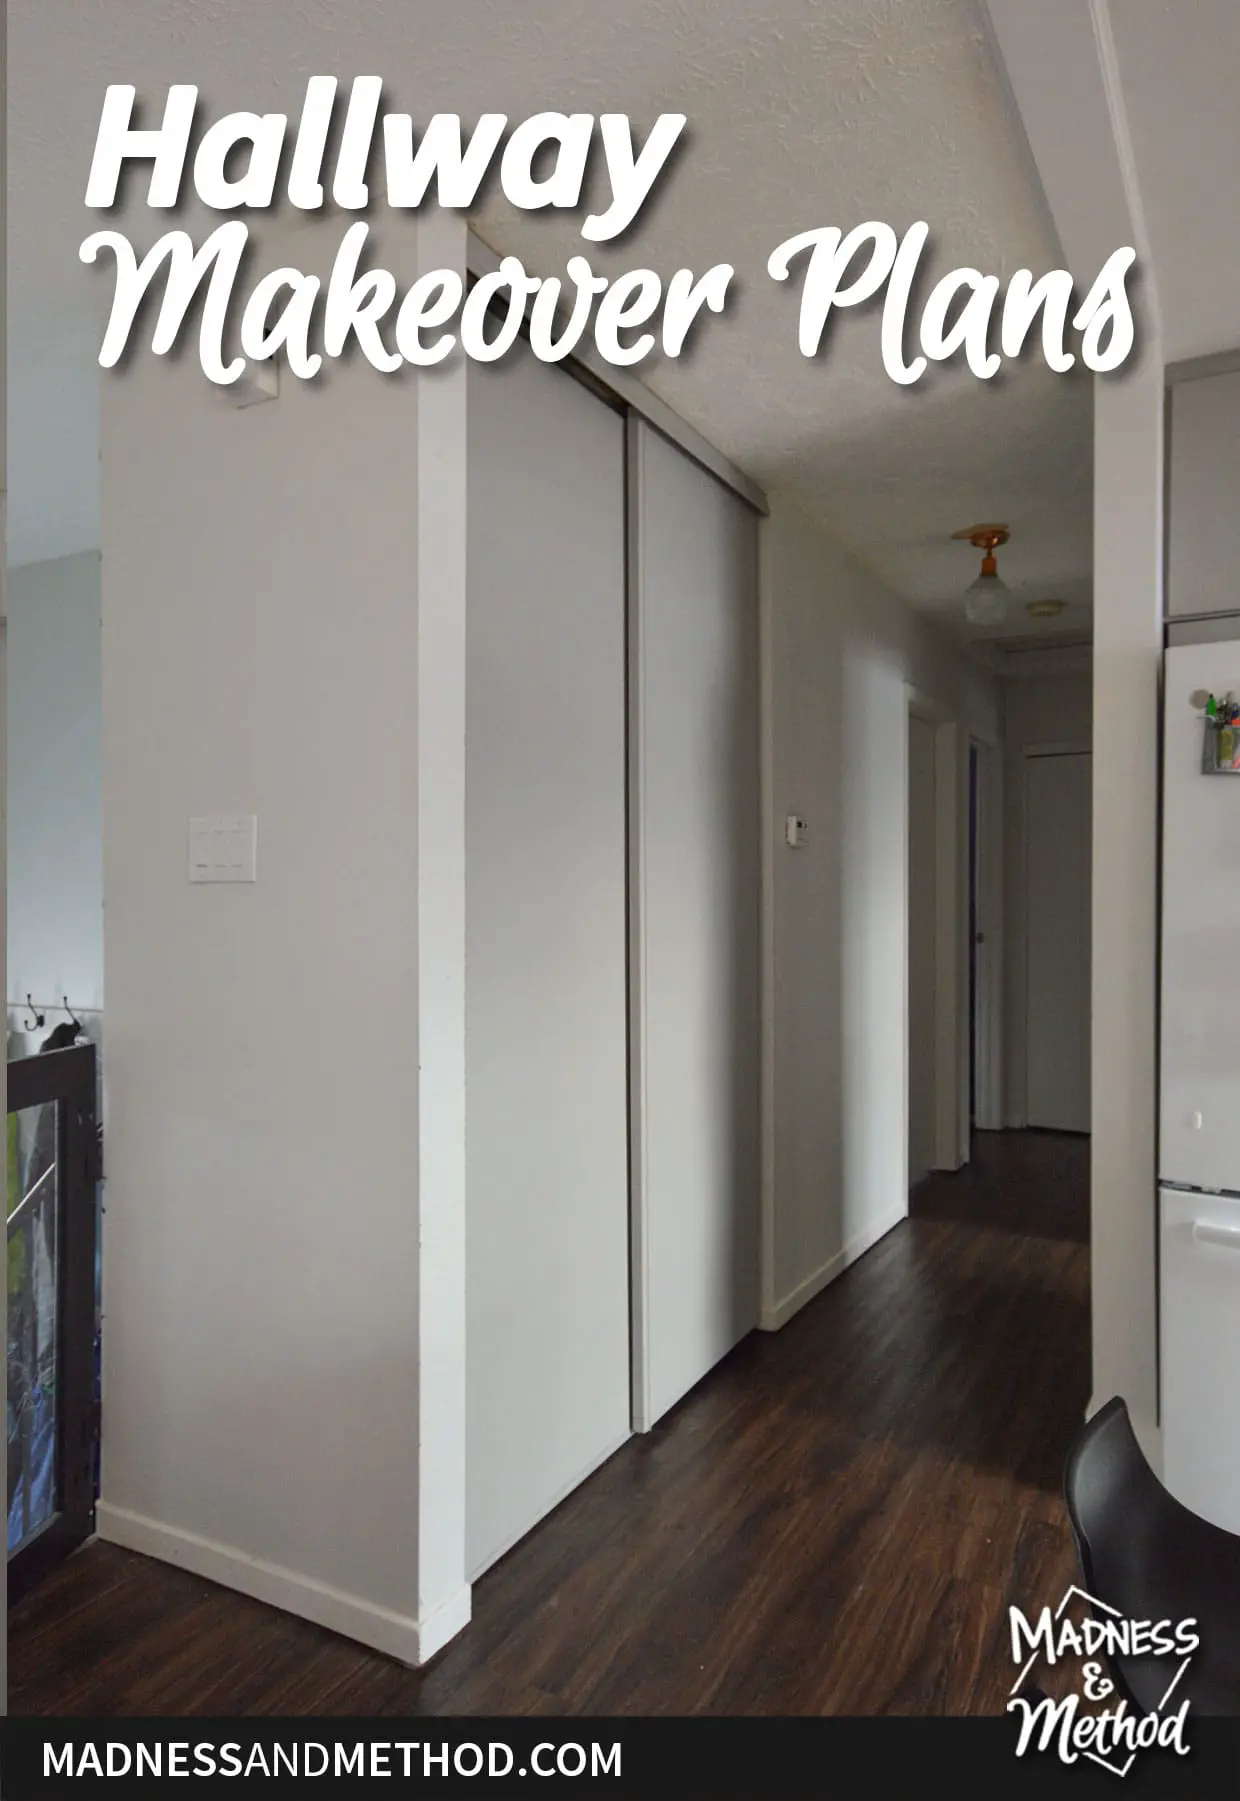 hallway makeover plans text overlay